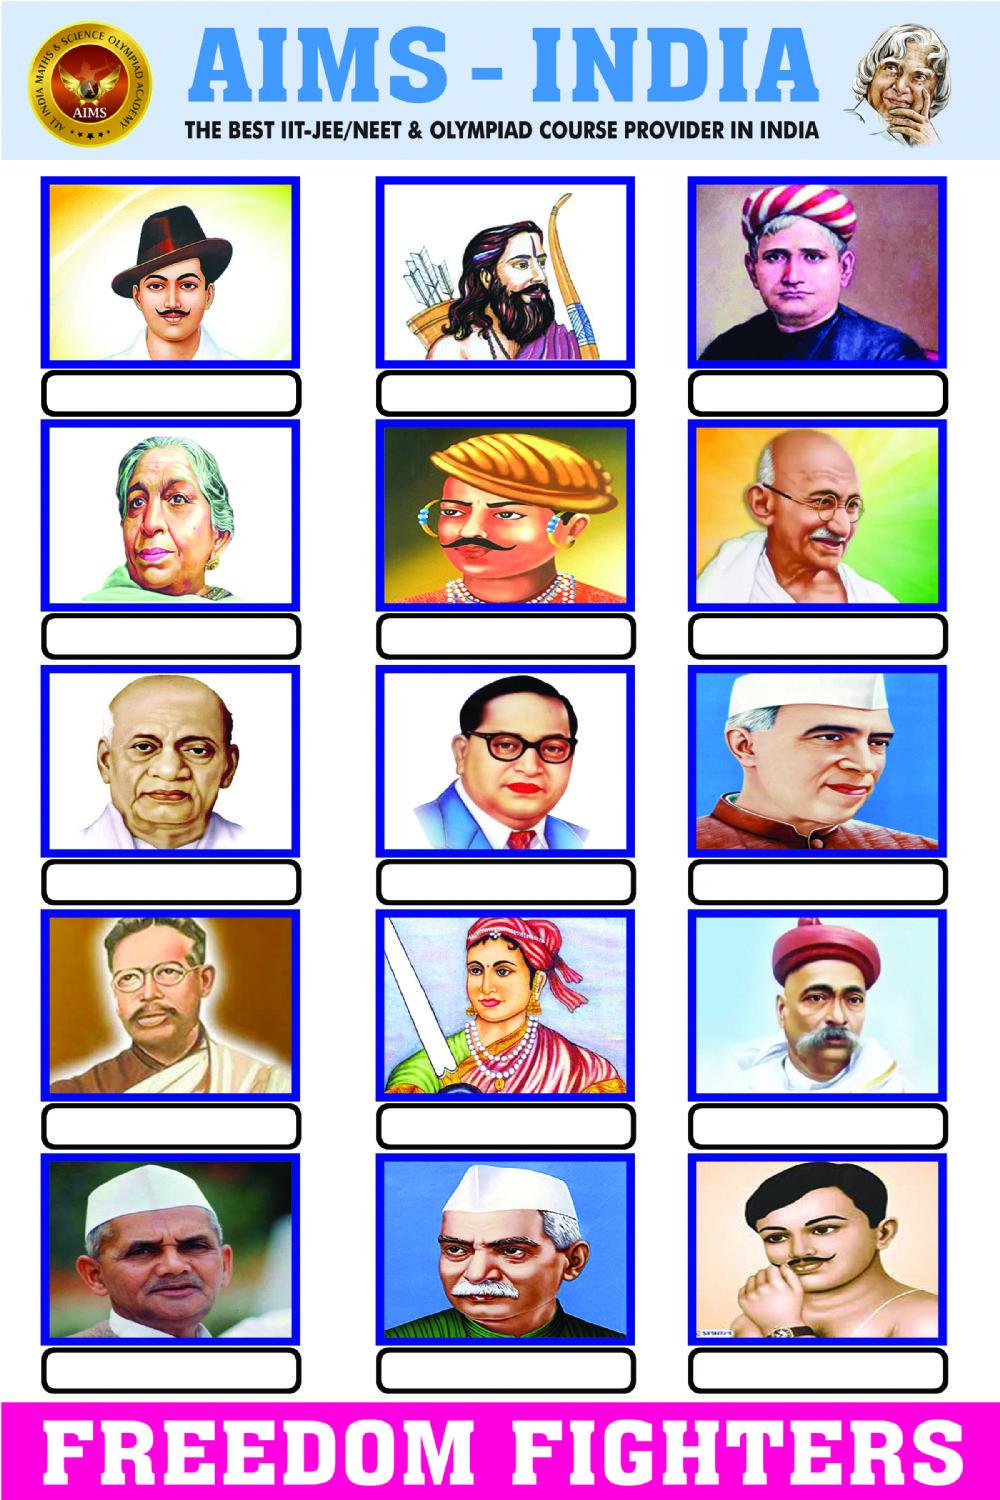 Our freedom fighters - aims-india